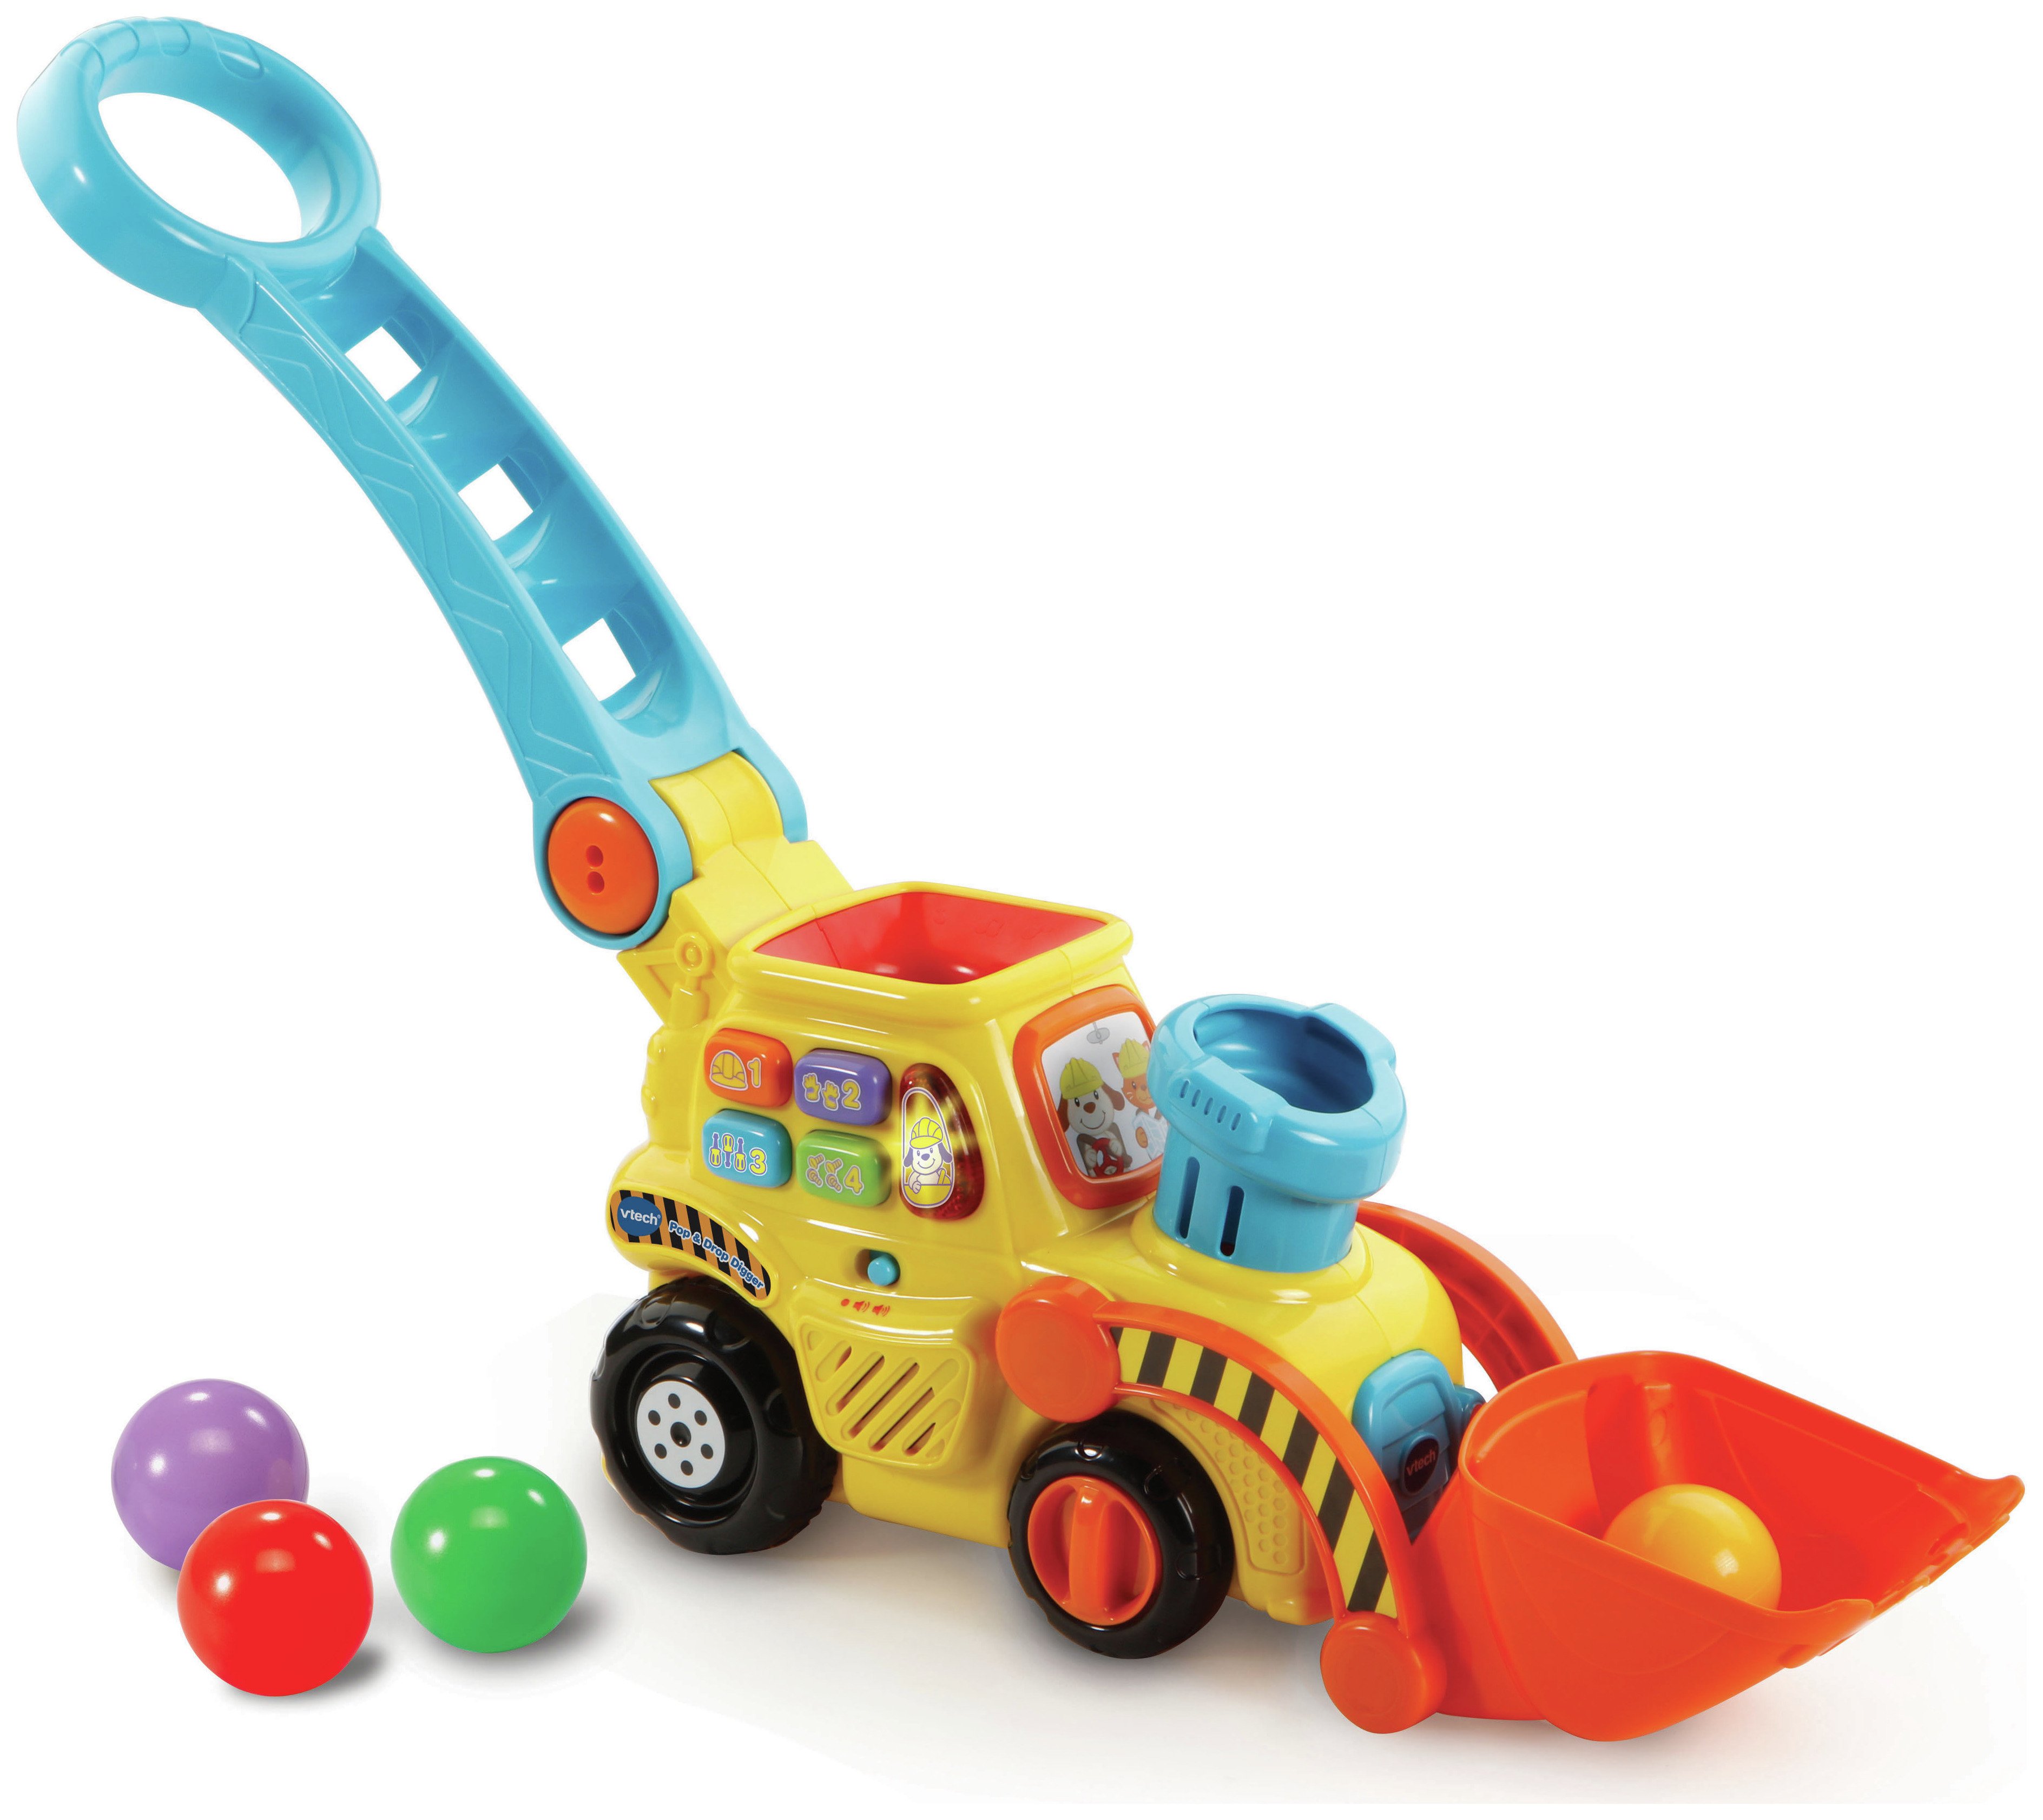 pink digger toy